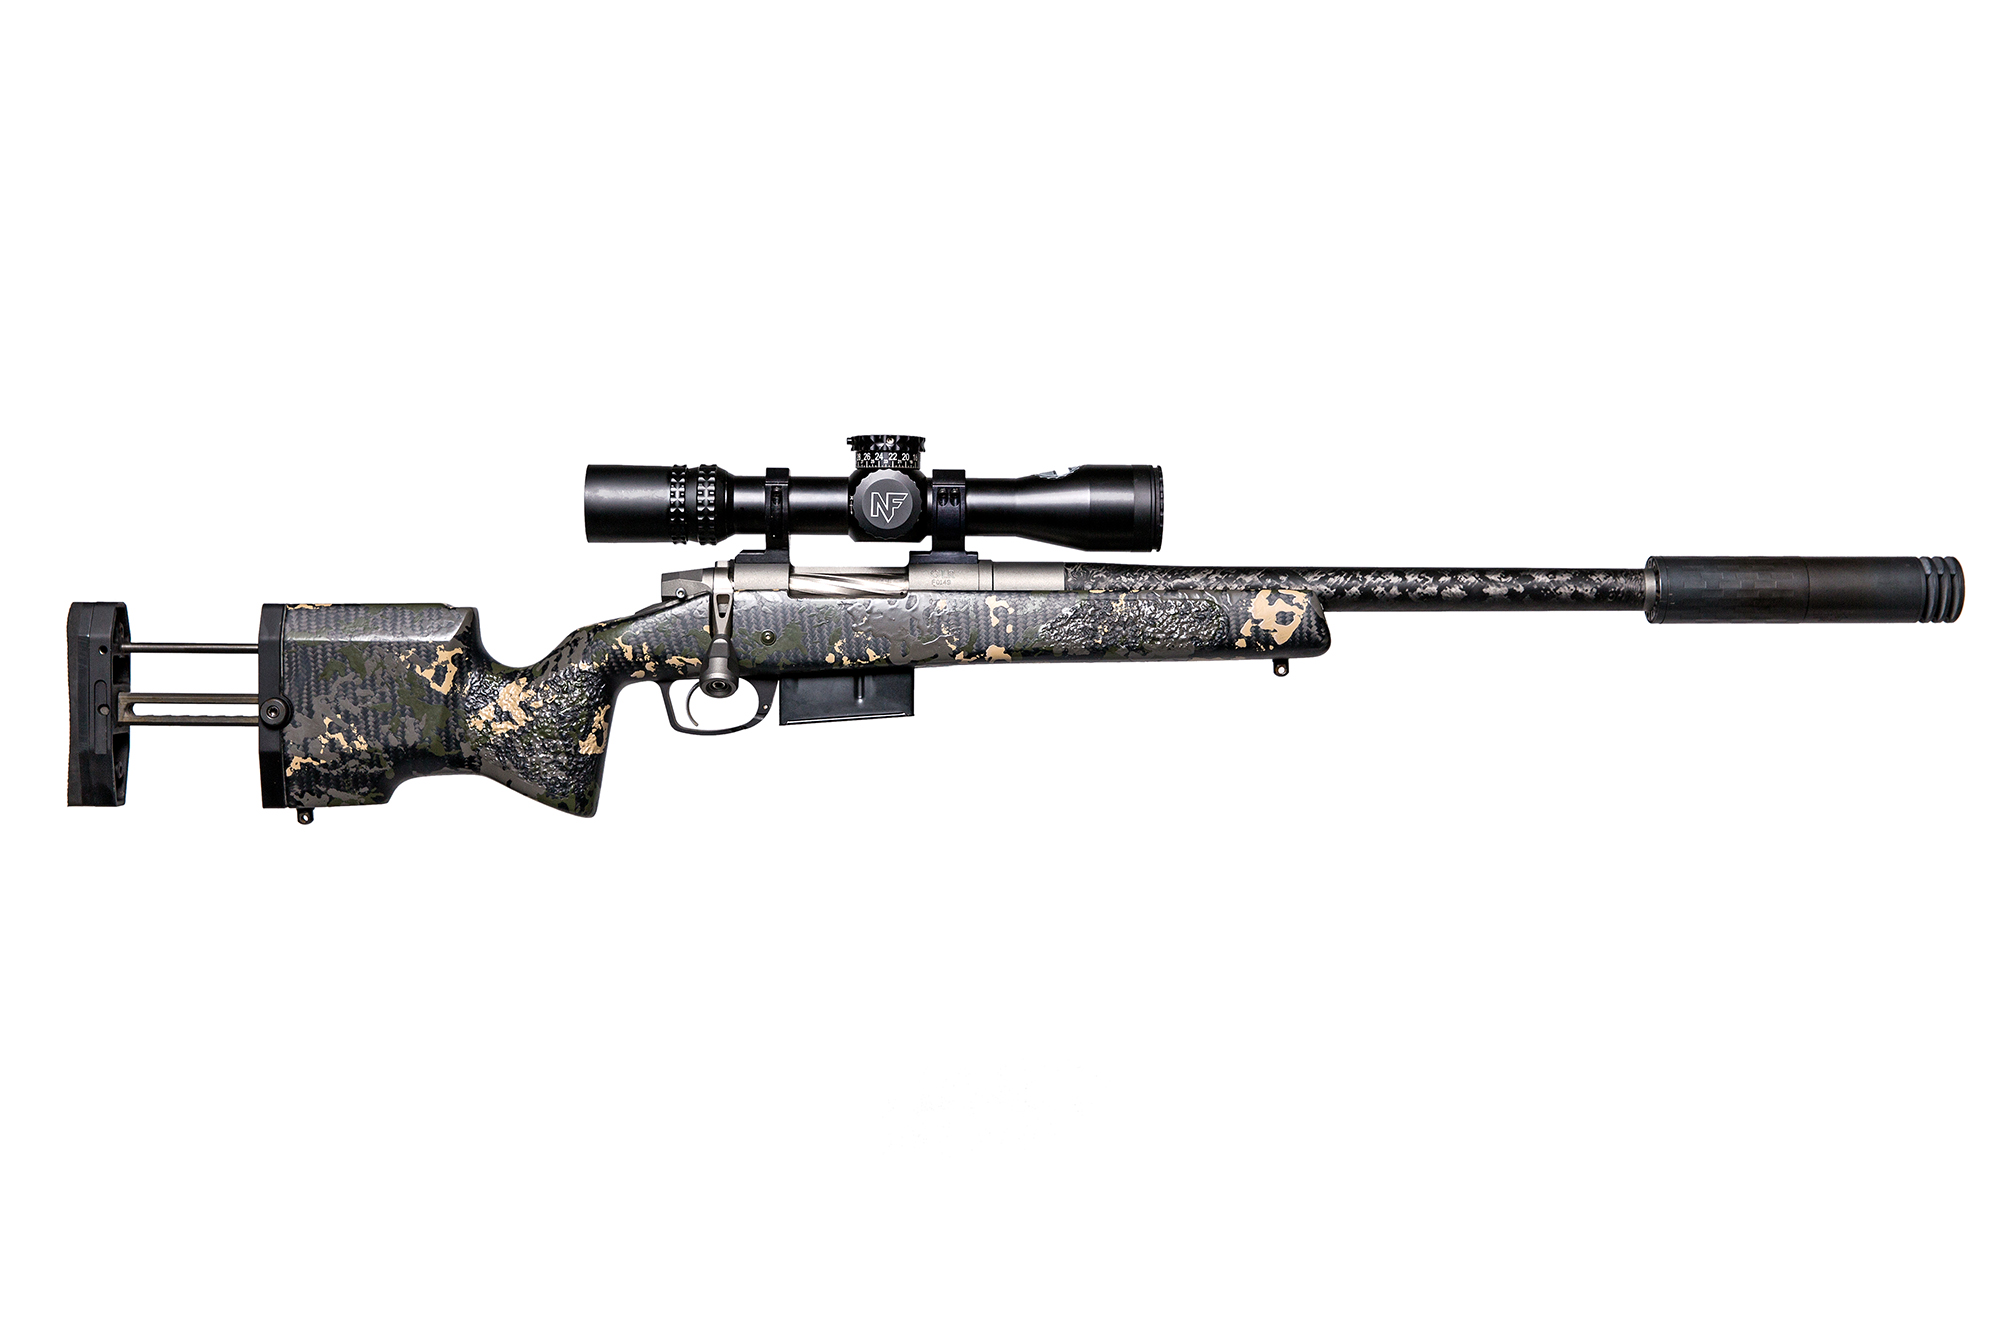 Gunwerks Introduces First Rifle of Collective Series.